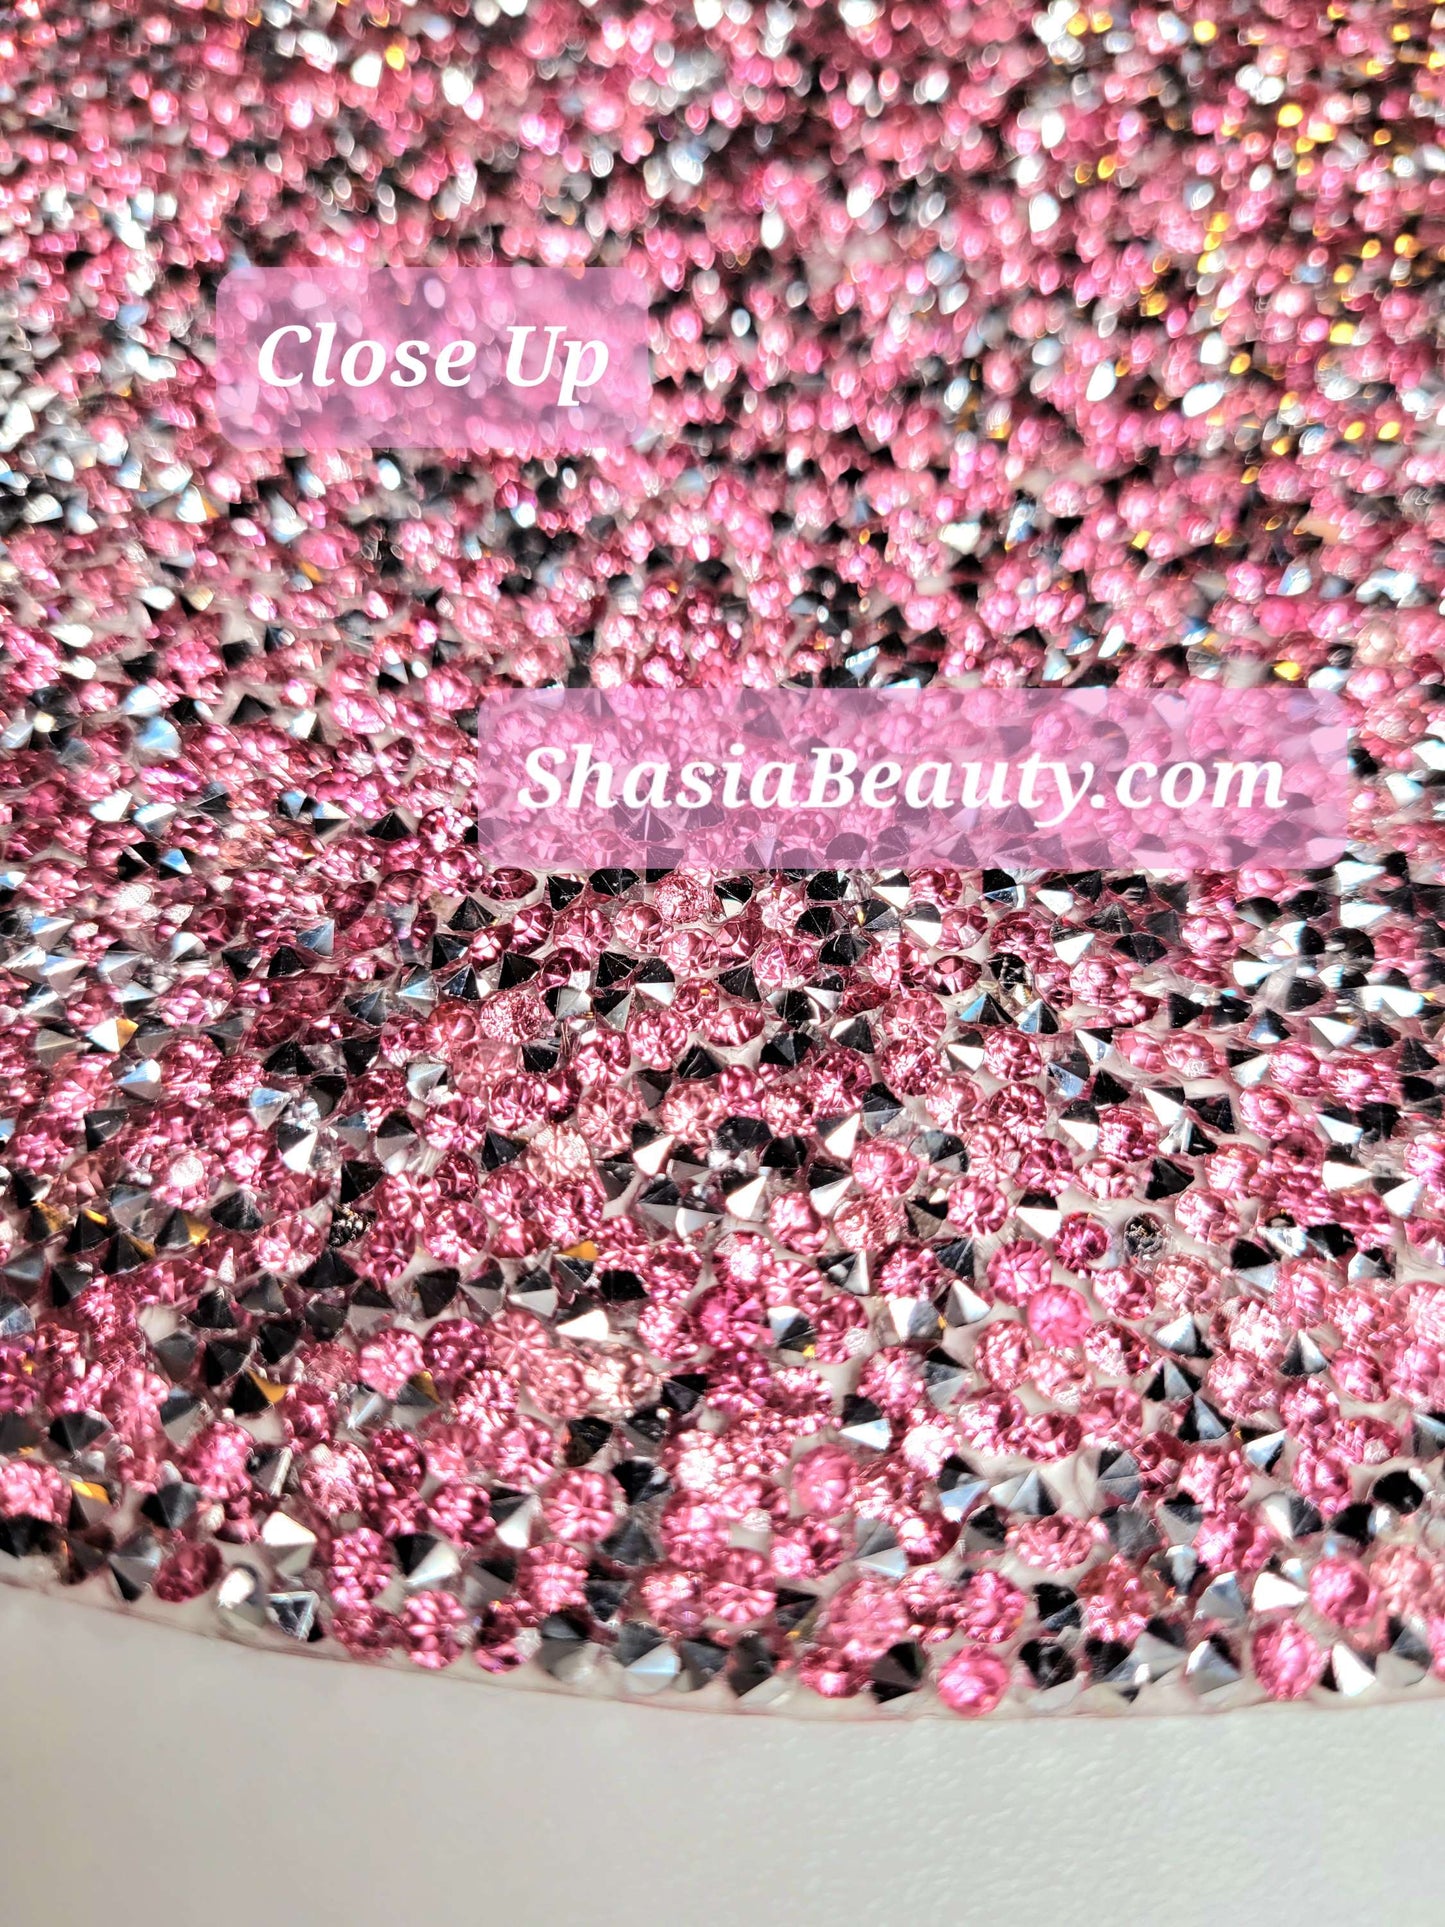 Perfect Pink Bling Nail Mats for Pictures